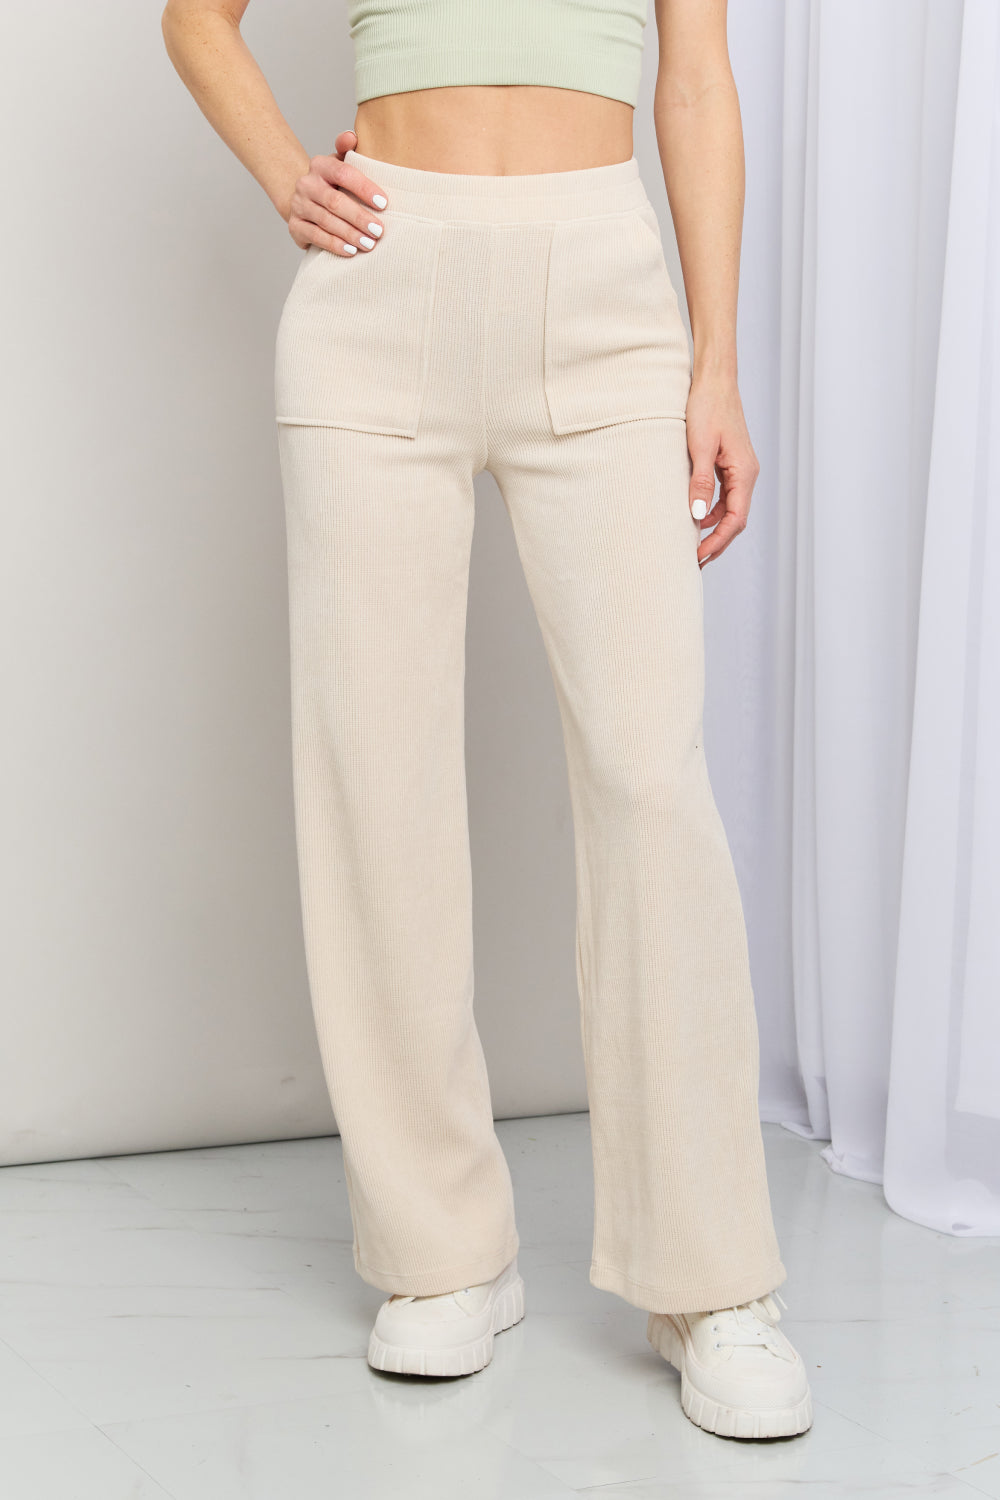 Yelete Elastic Waist Wide Leg Pants with Pockets in Ivory